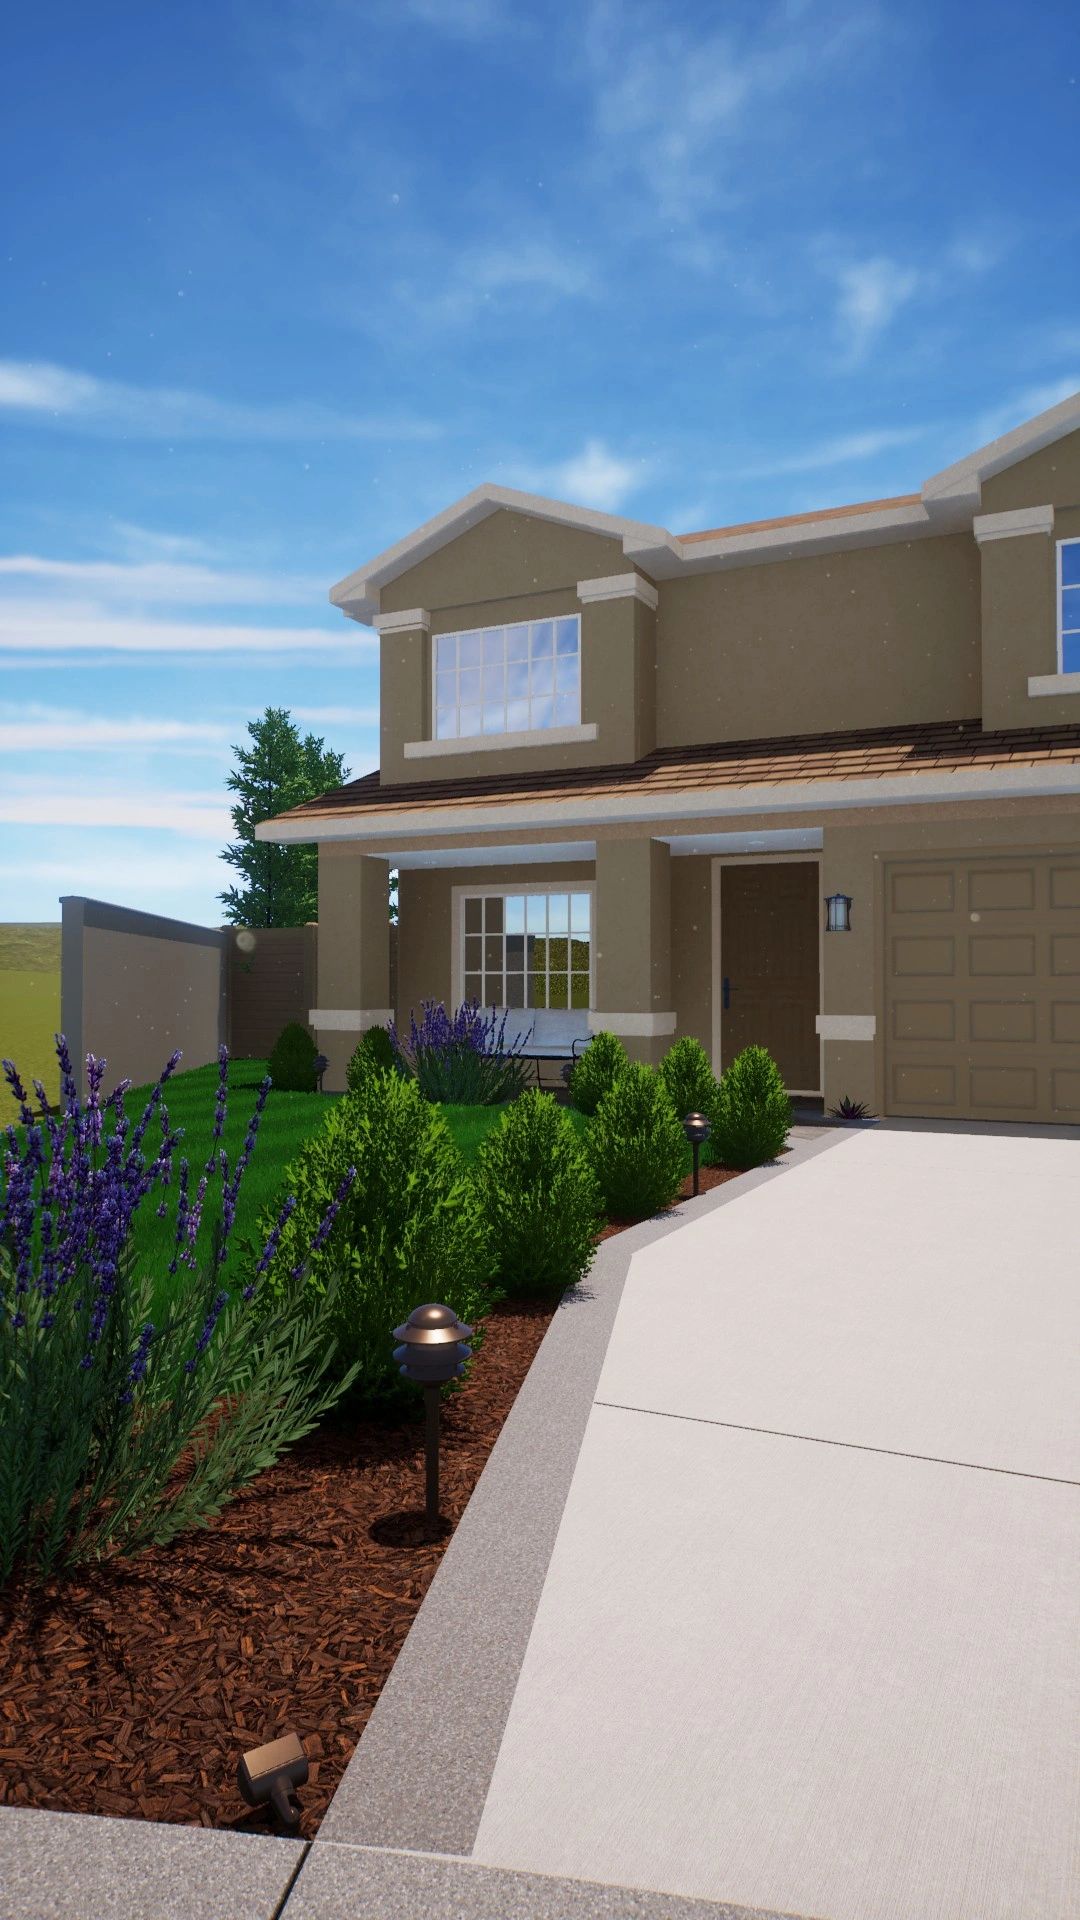 New construction home with Landscape Design concept  for the front yard